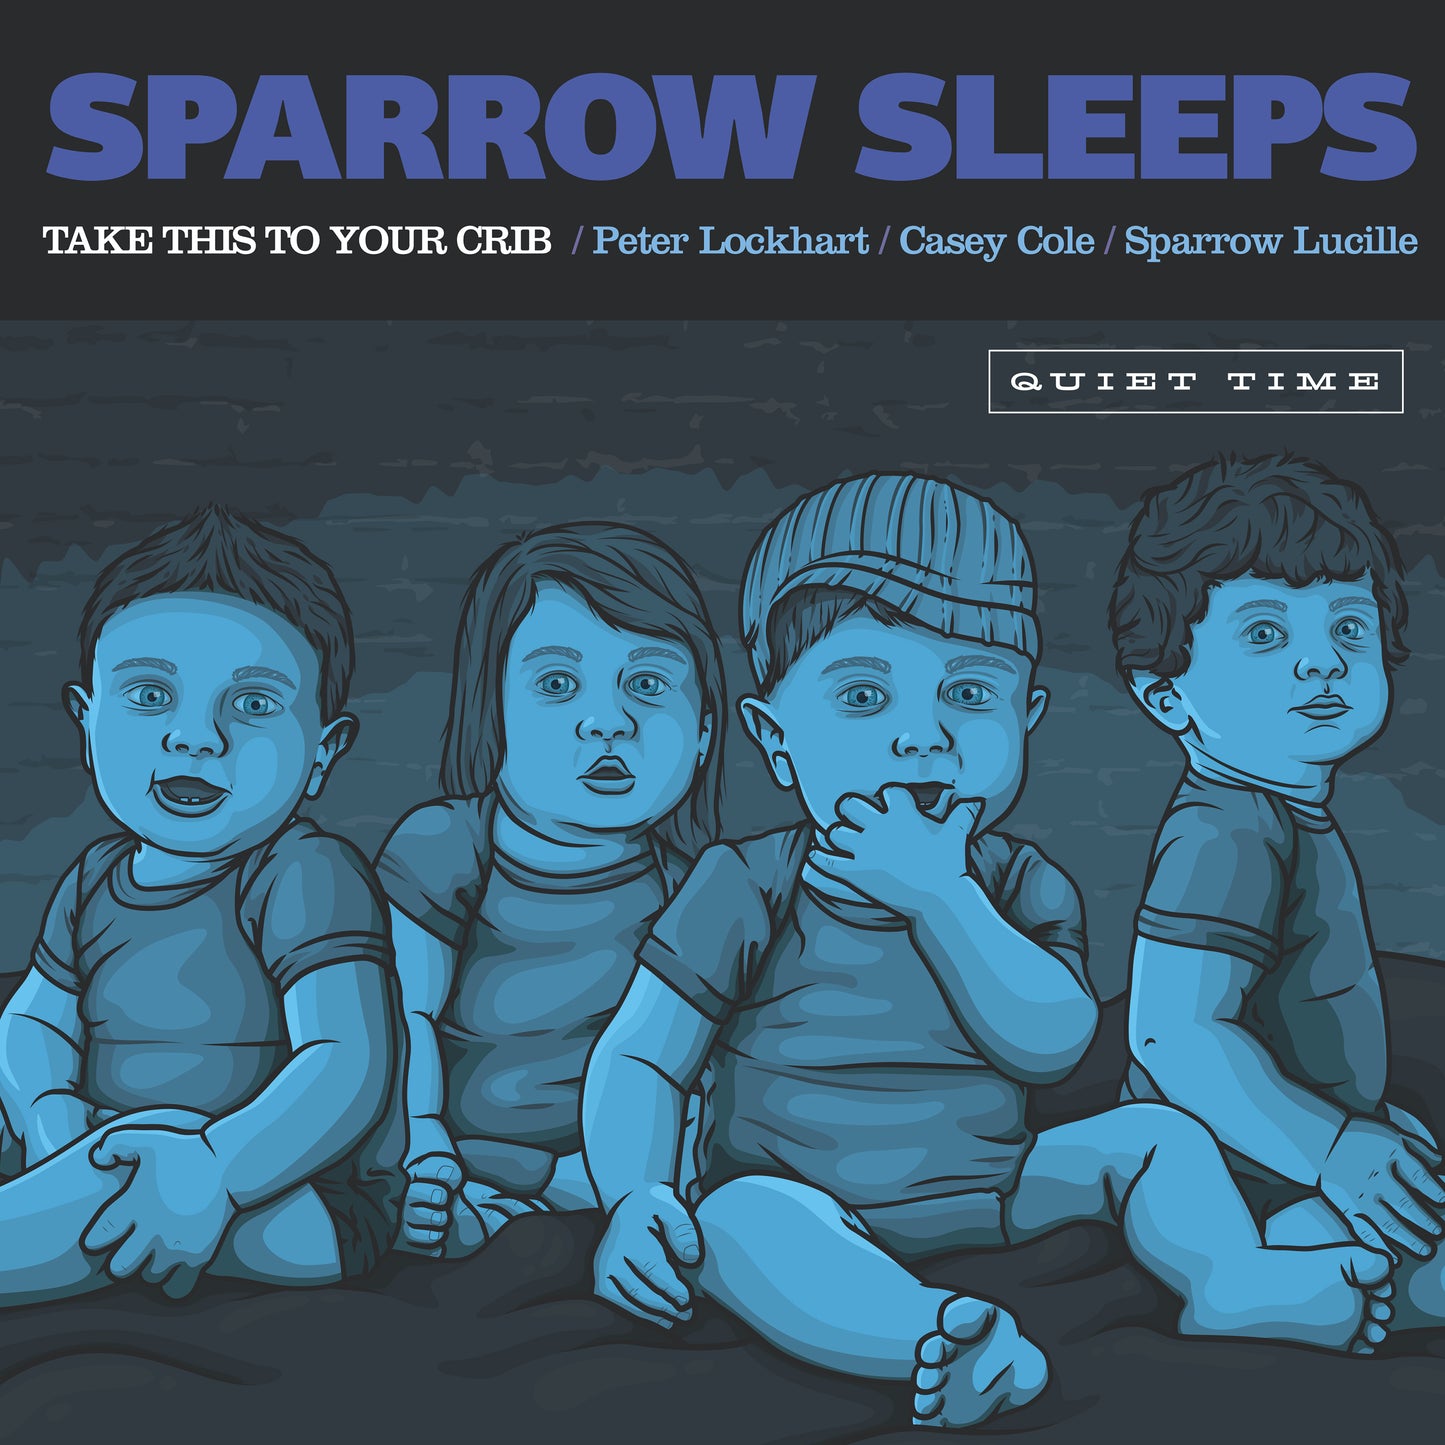 Sparrow Sleeps/Fall Out Boy "Take This To Your Crib" 2xLP